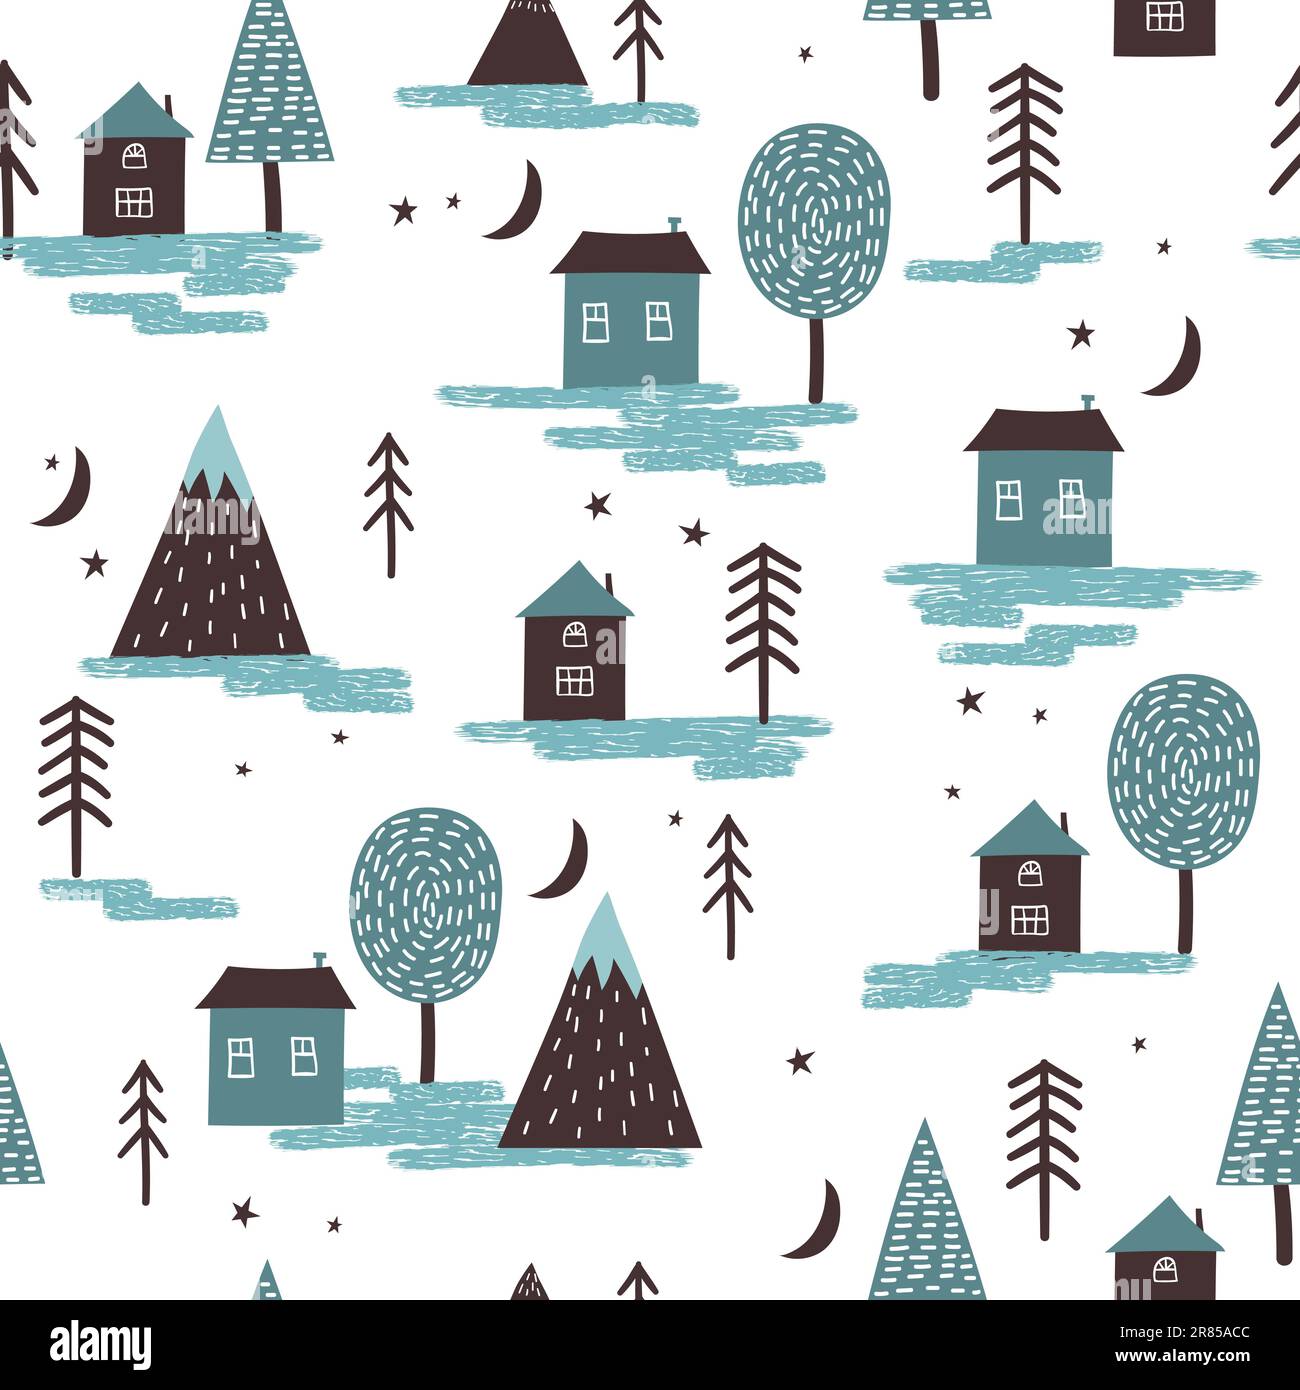 Seamless scandinavian pattern with hand drawn houses, mountains and trees. Stock Vector